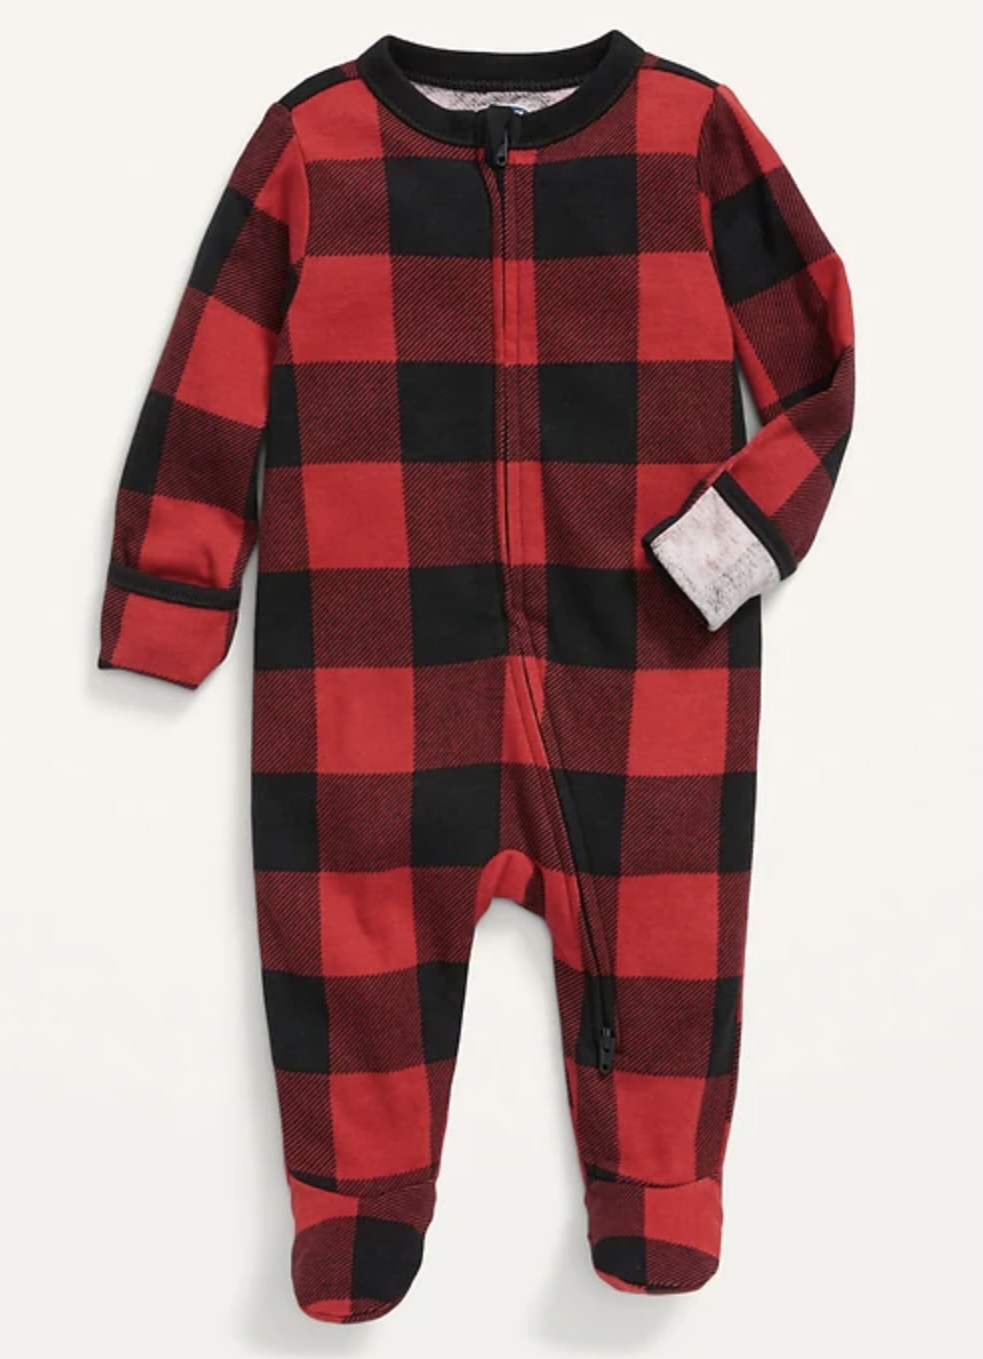 Unisex plaid one-piece baby set from Old Navy